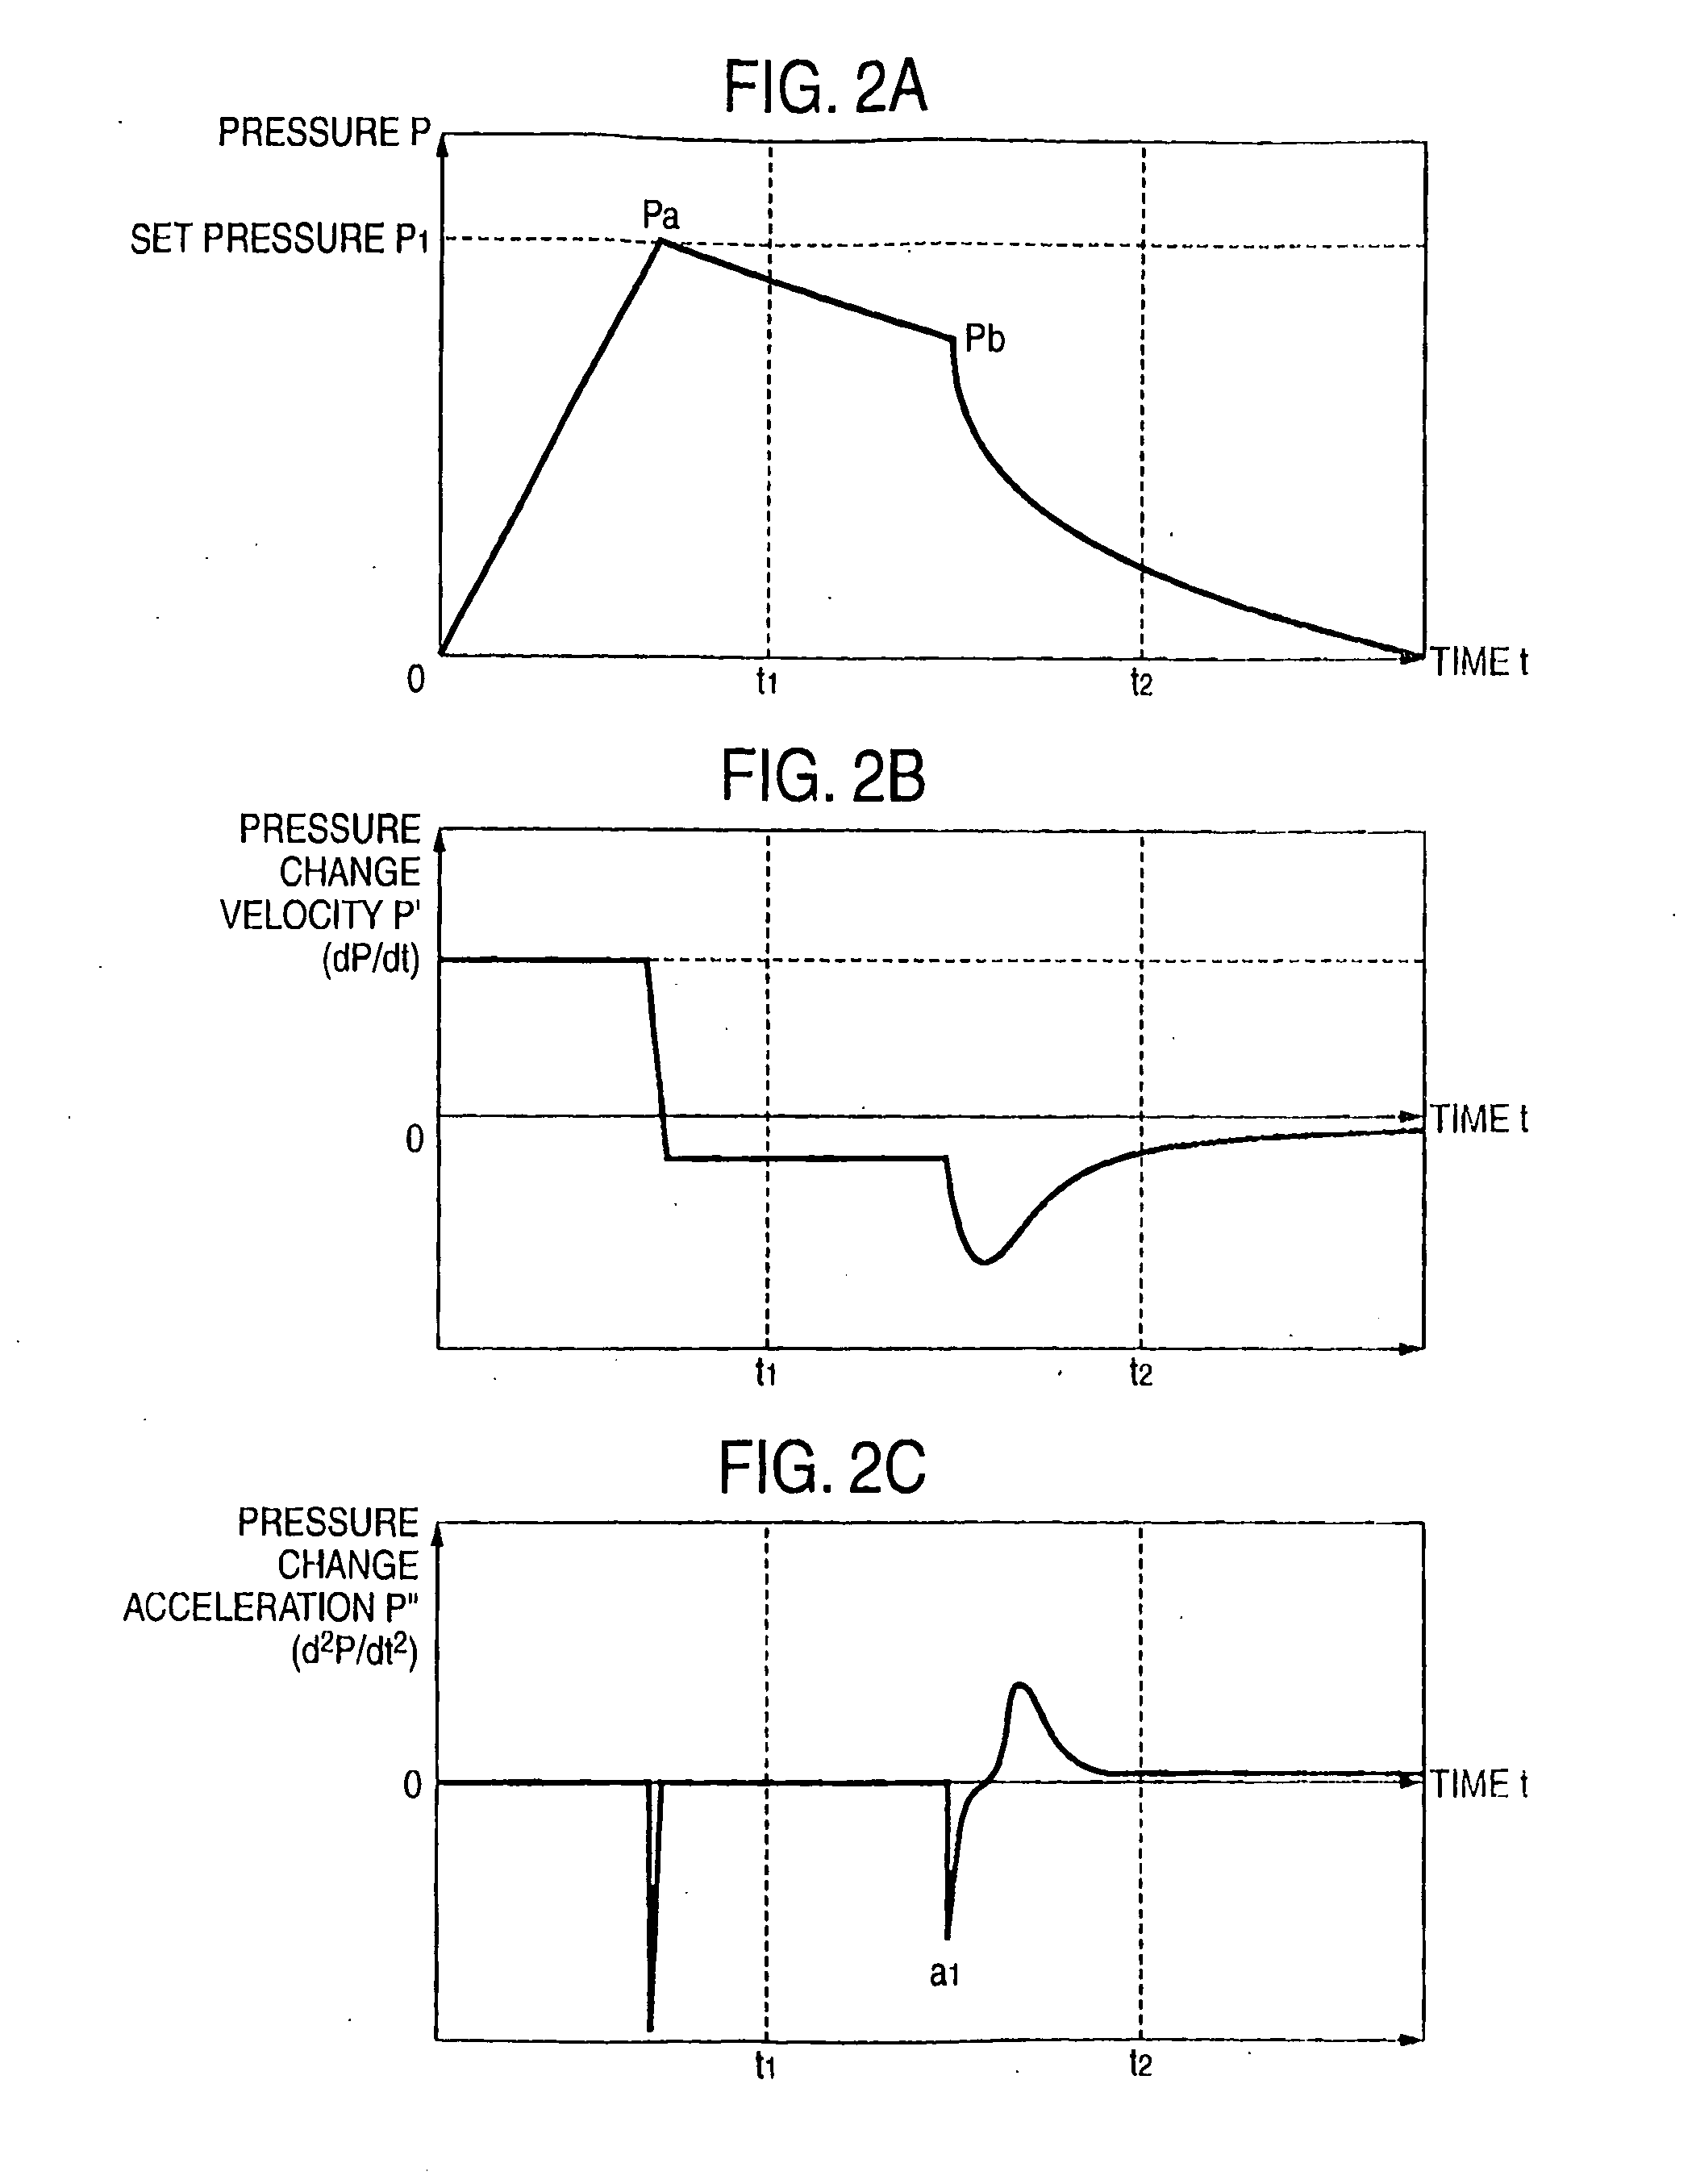 Method and Apparatus of Automatically Isolating and Purifying Nucleic Acid